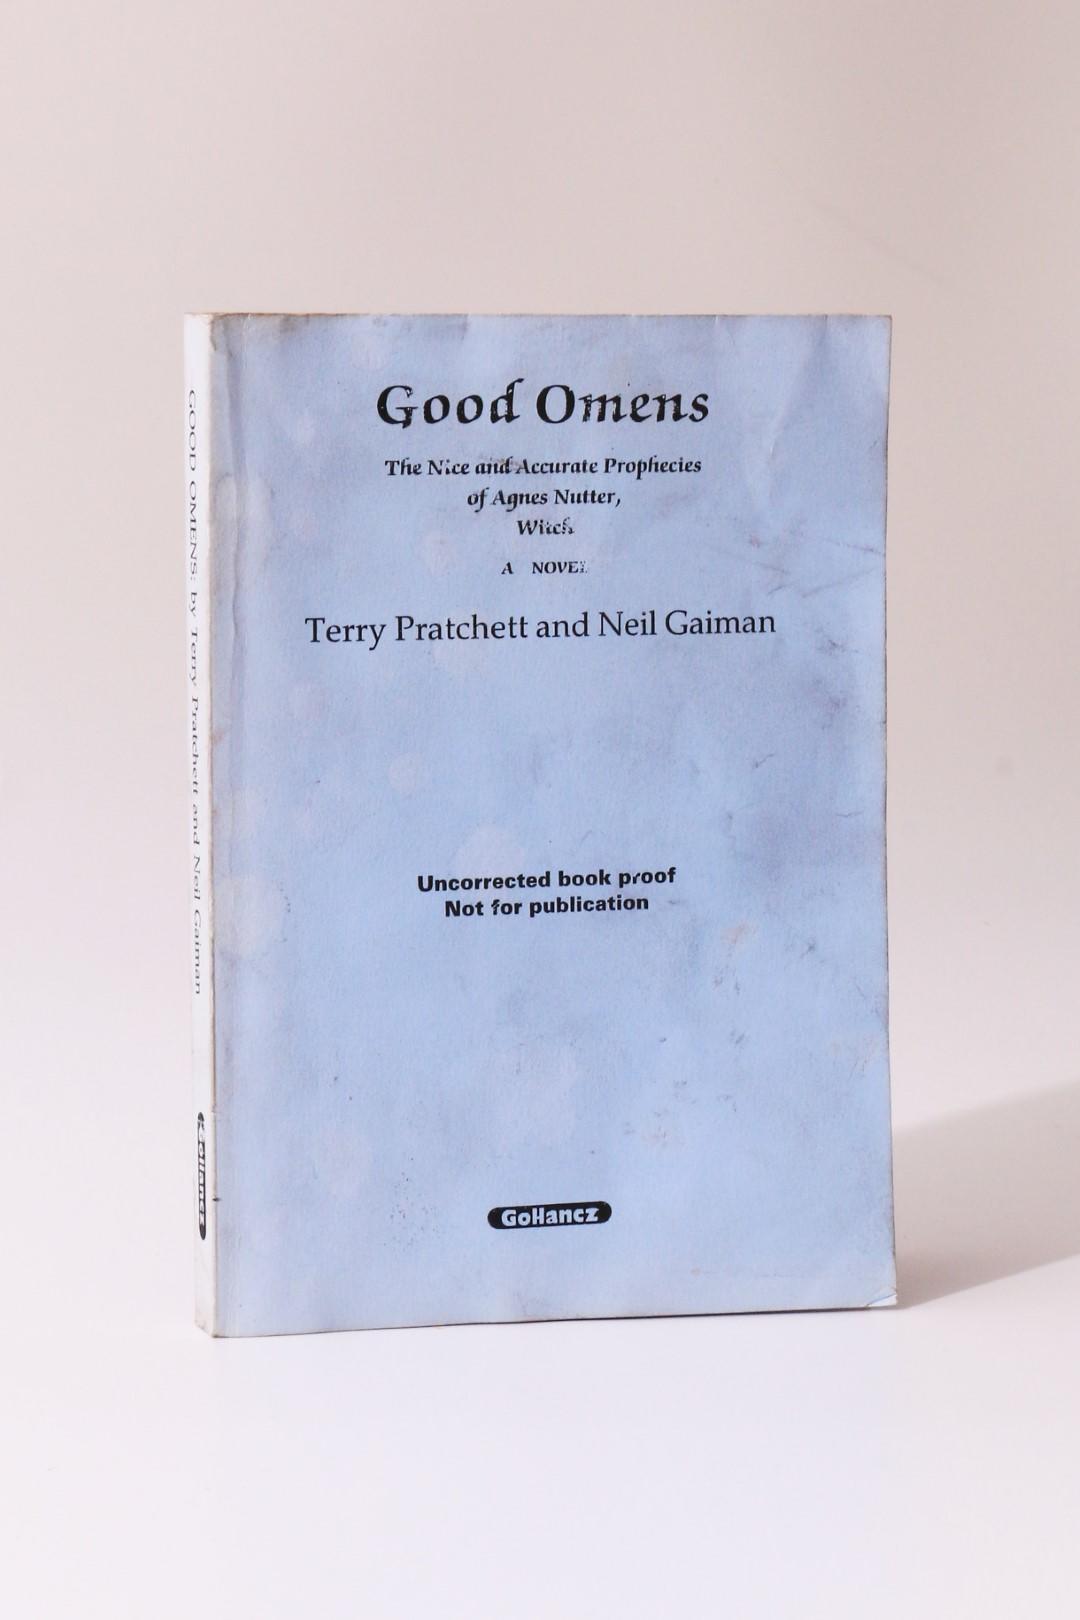 Terry Pratchet & Neil Gaiman - Good Omens: The Nice and Accurate Prophecies of Agnes Nutter, Witch - Gollancz, 1990, Proof.